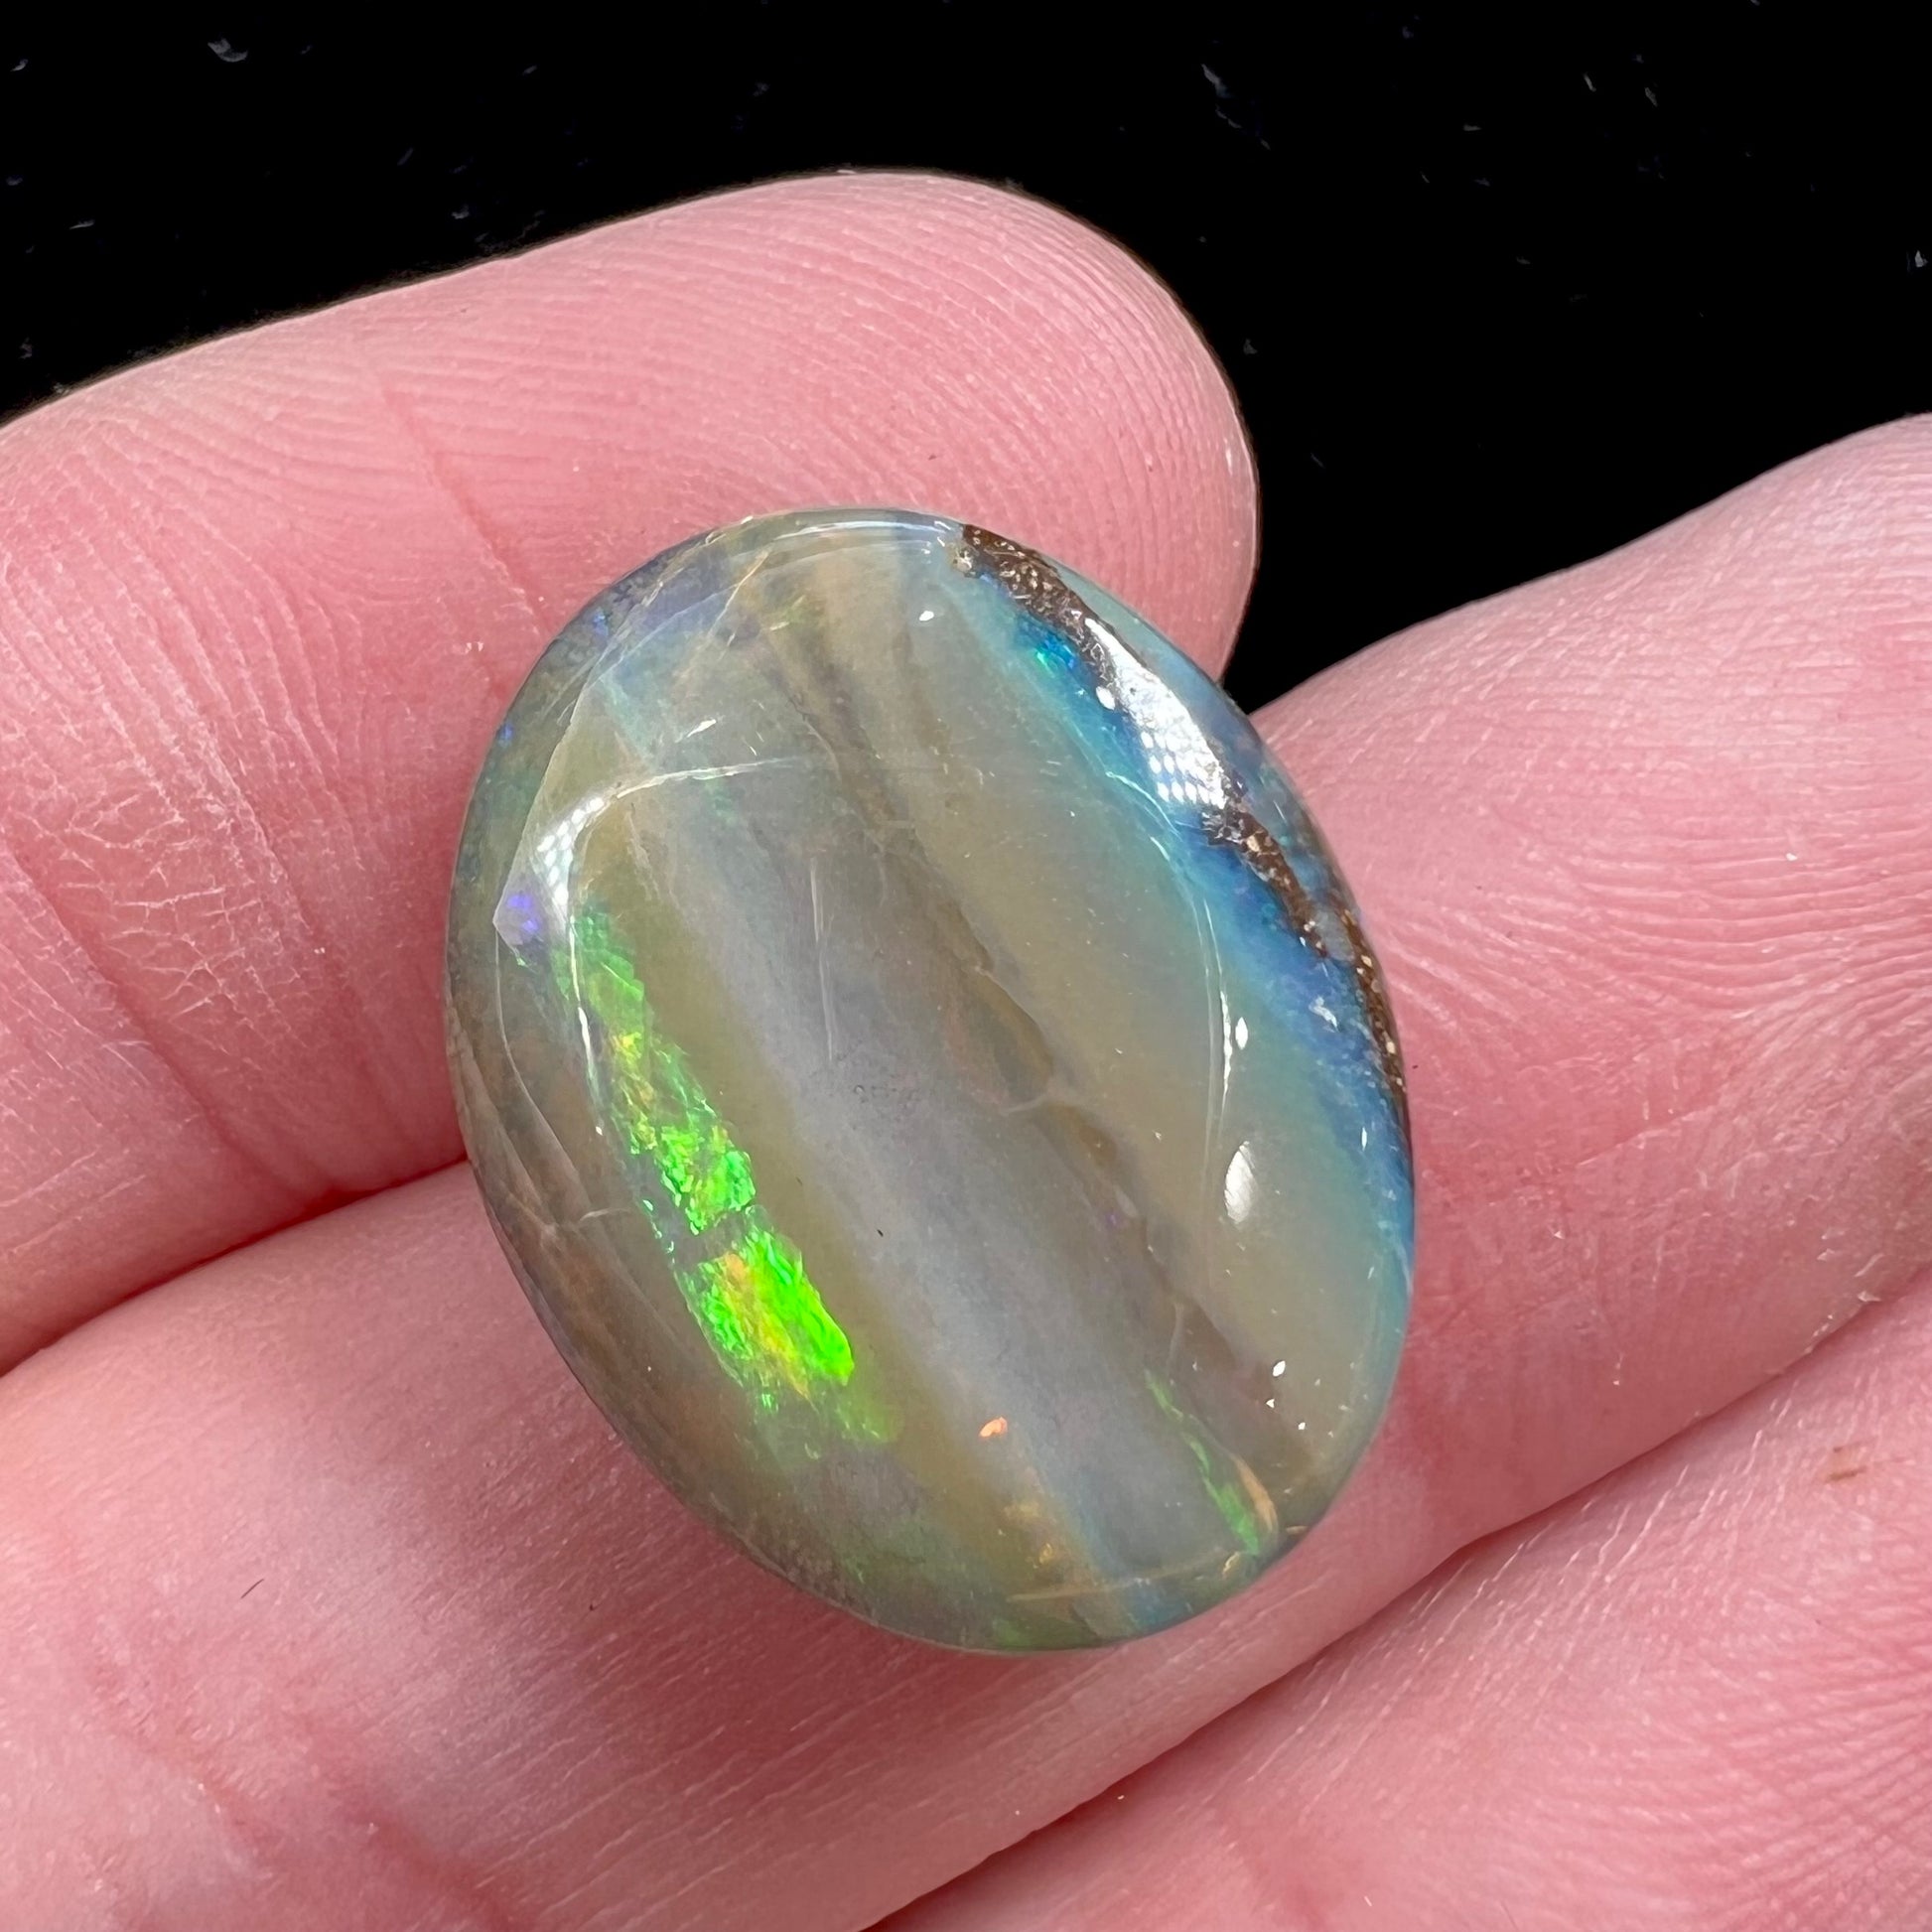 A loose, oval cabochon cut Quilpie boulder opal stone from Queensland, Australia.  The predominant color flash is green.